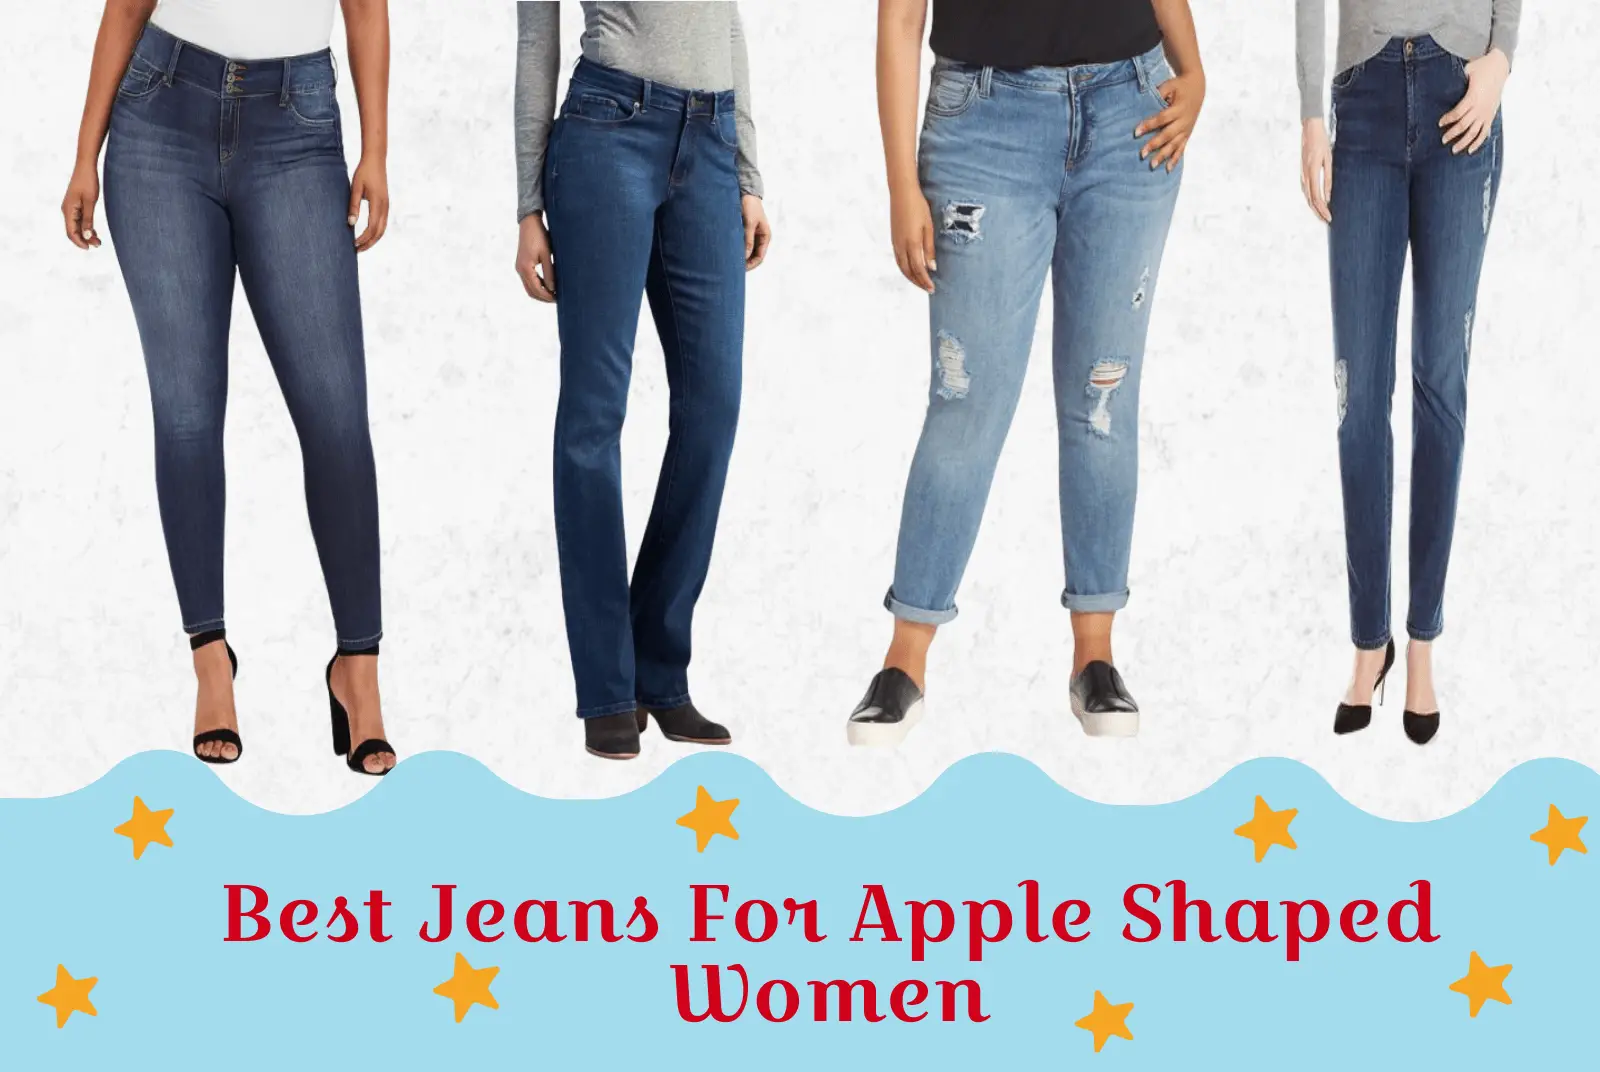 Find Jeans for an Apple Shape